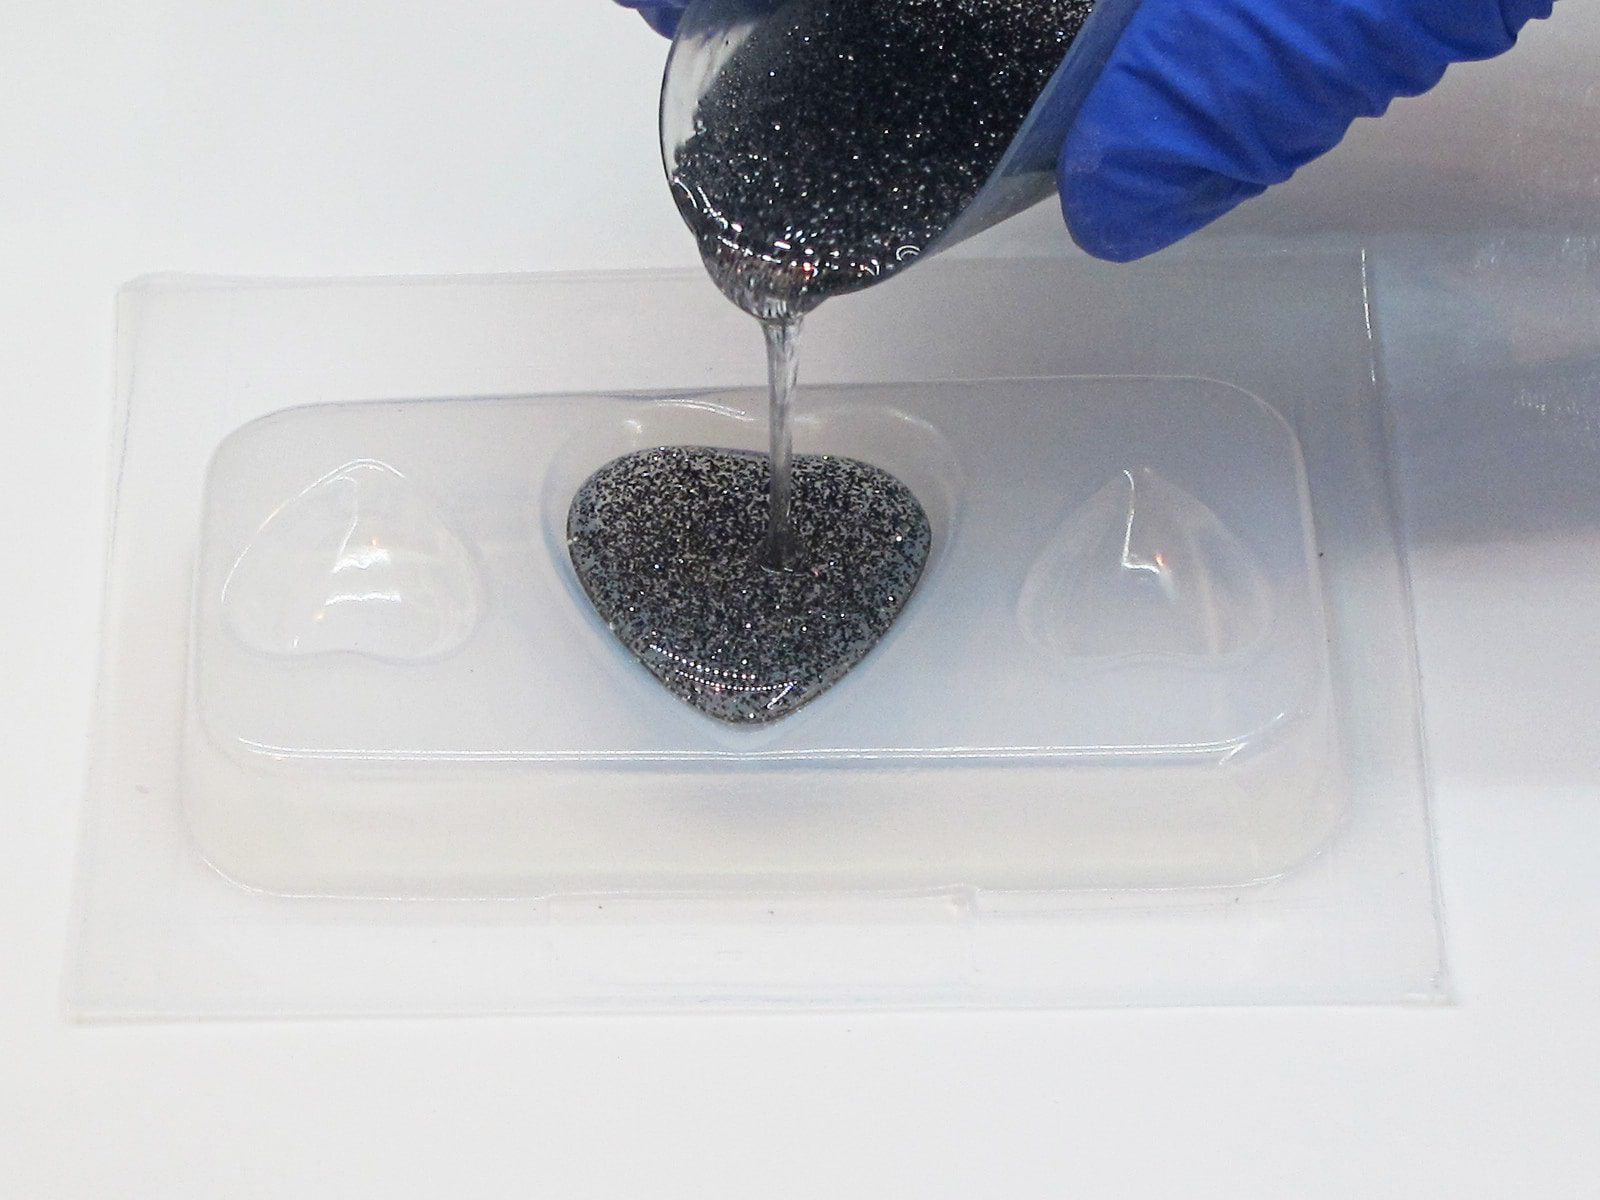 pouring resin into a plastic heart mold